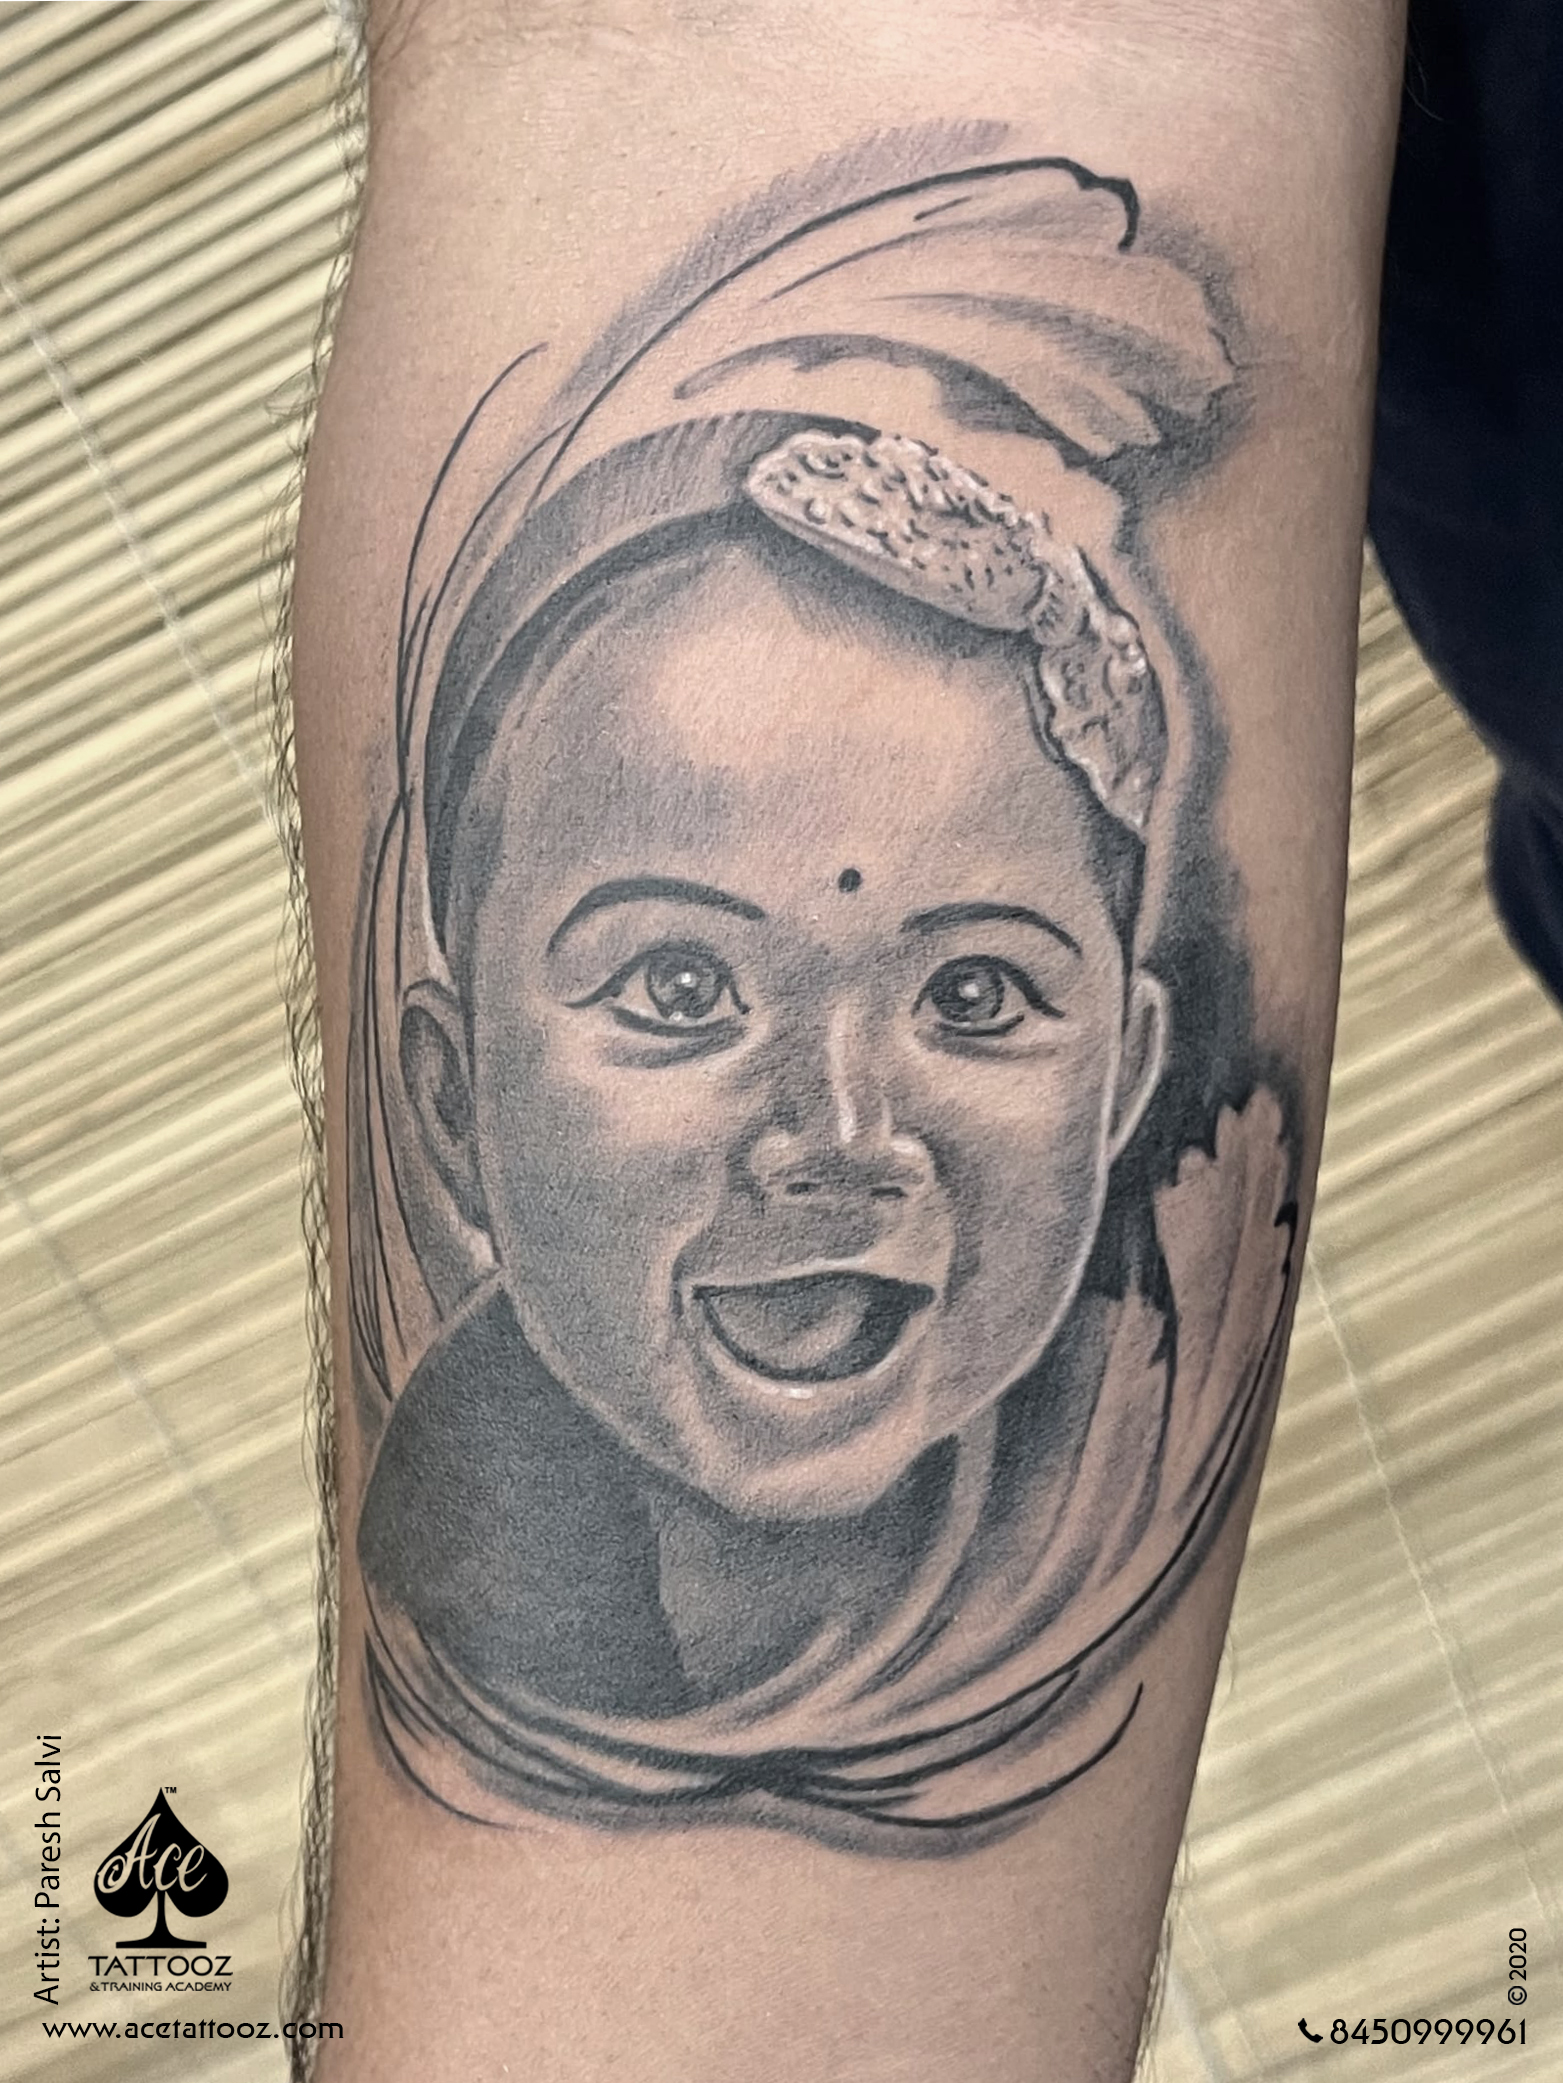 I got a face tattoo of my baby's head